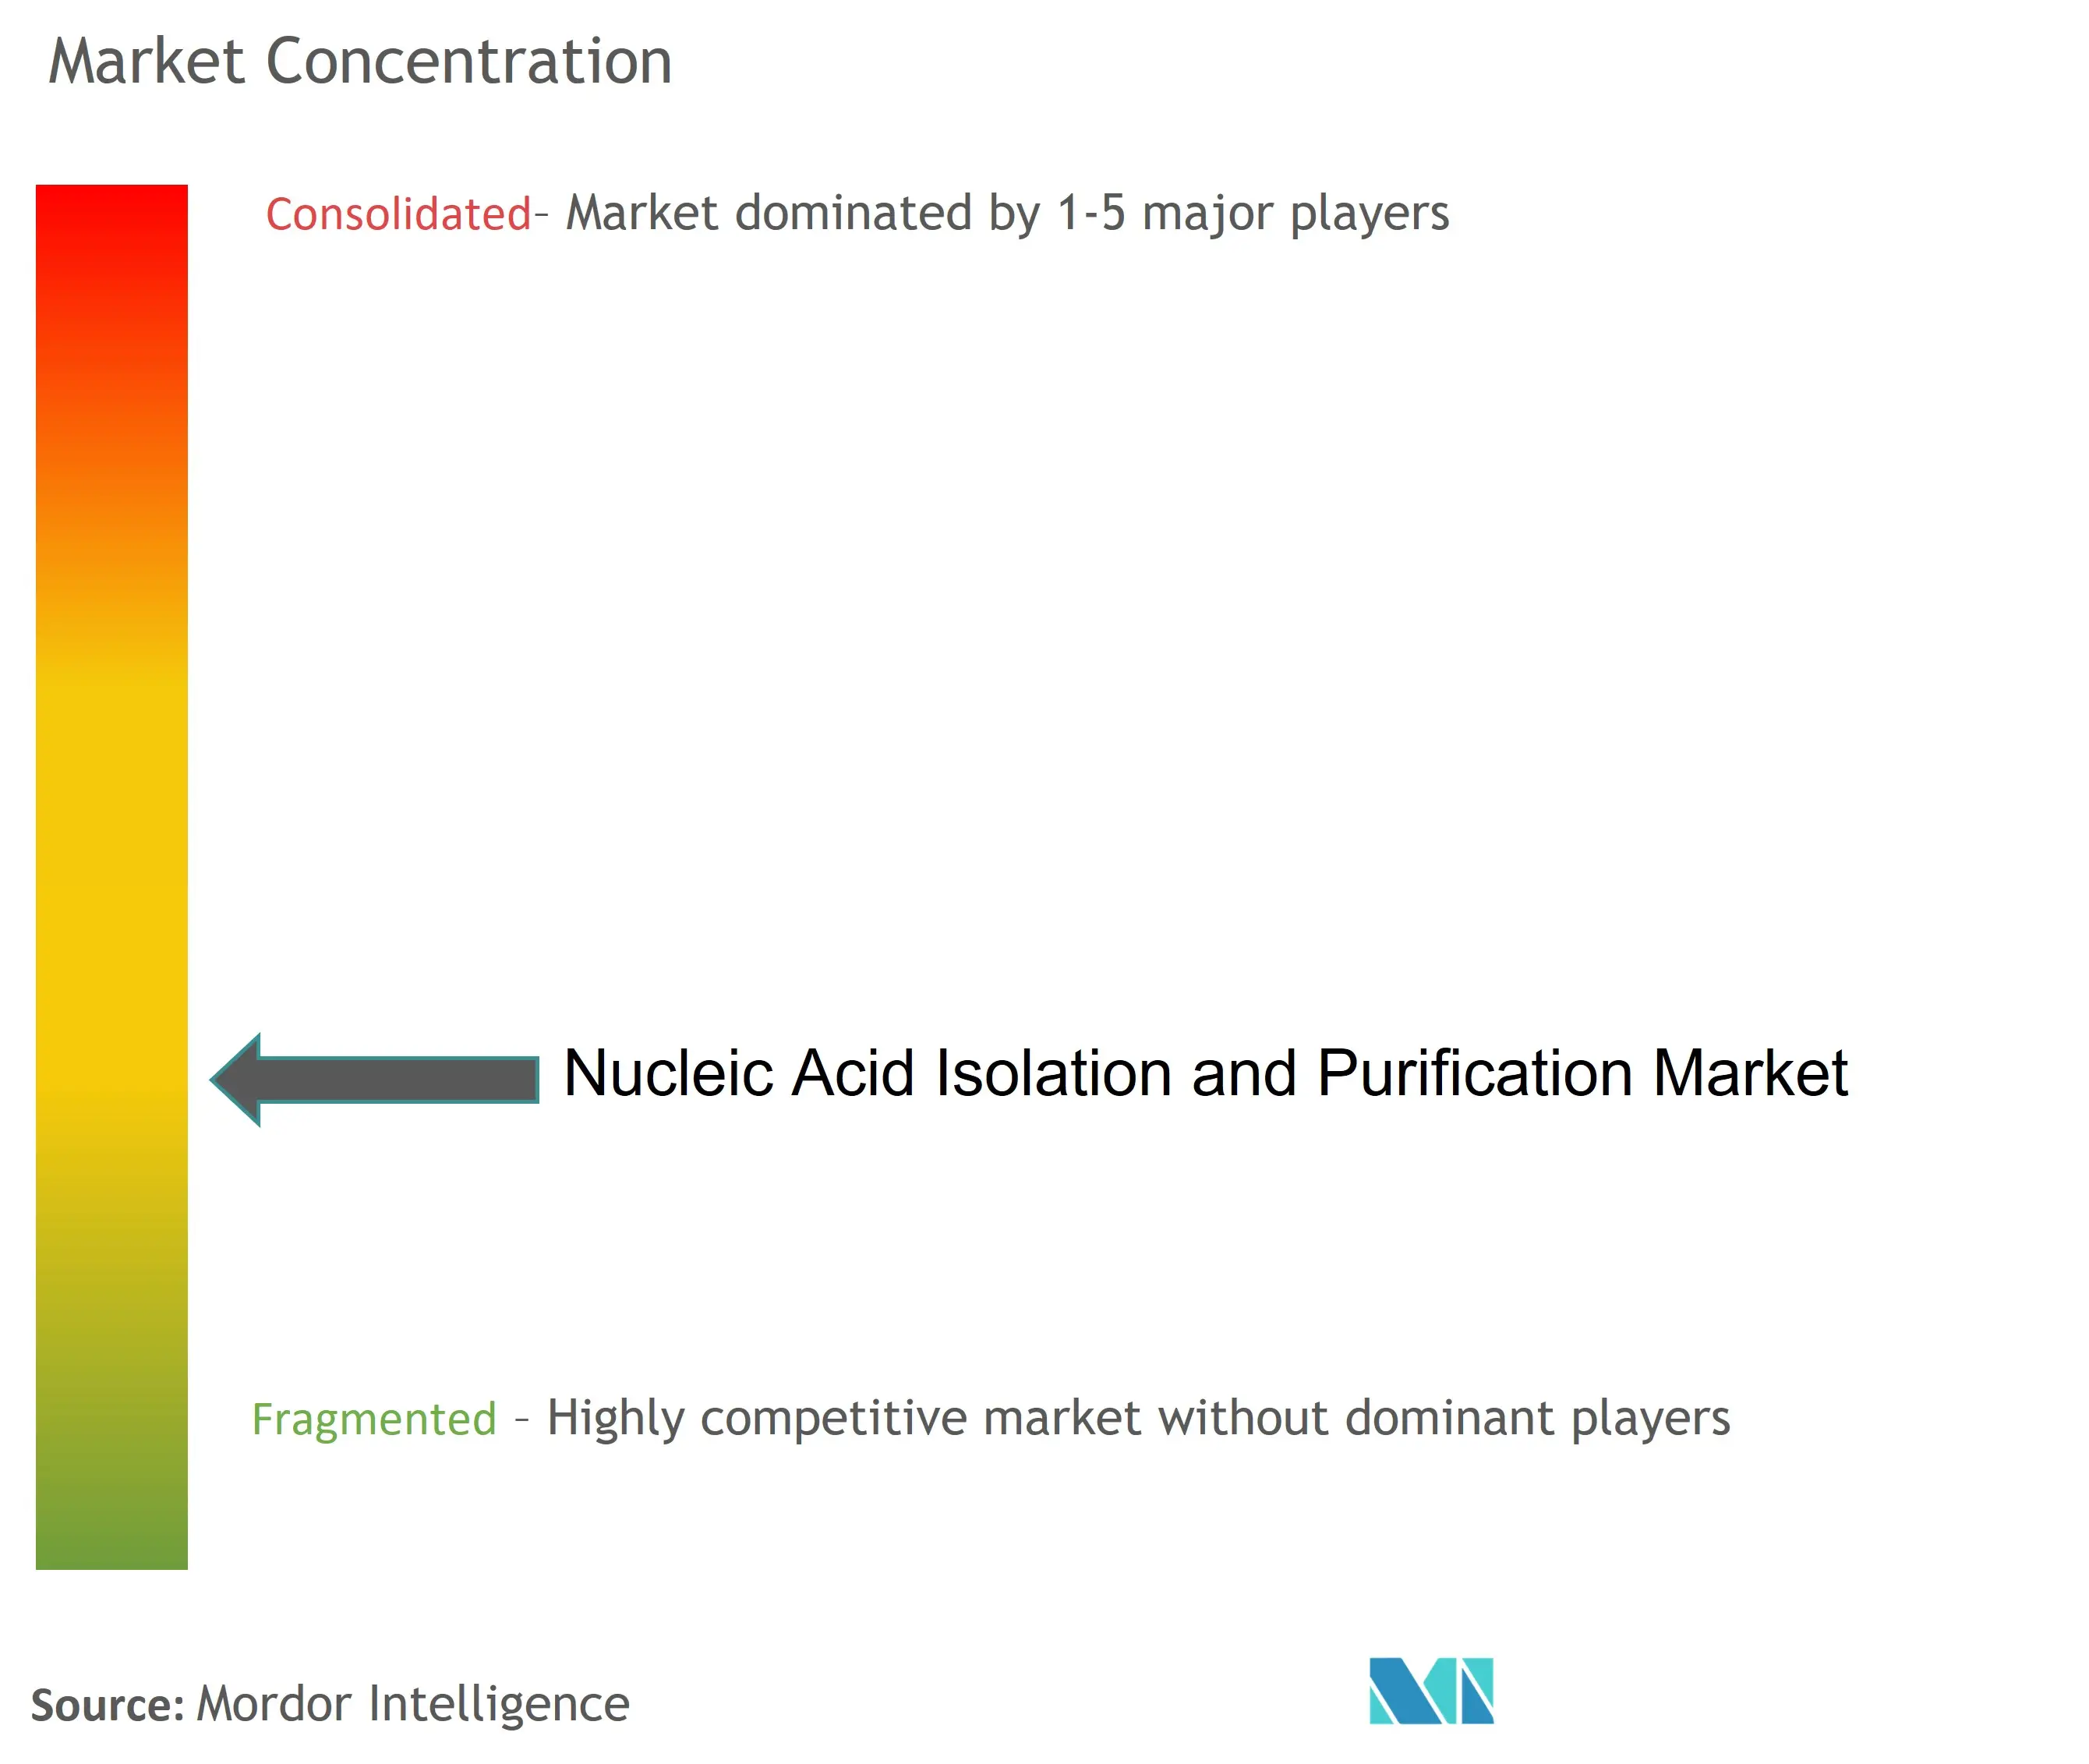 Nucleic Acid Isolation and Purification Market Concentration